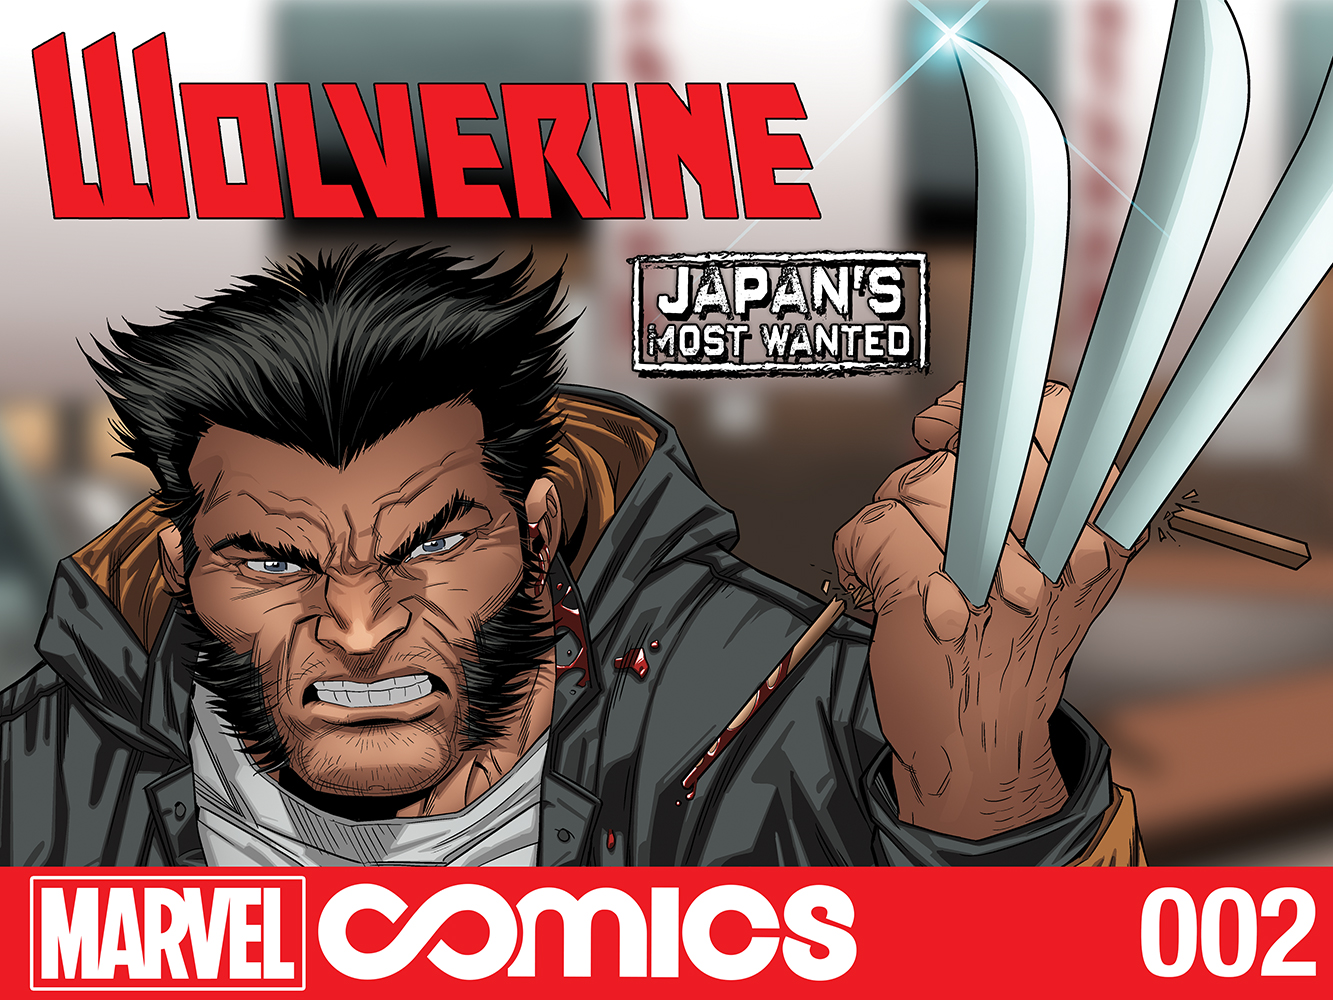 Wolverine: Japan's Most Wanted #9